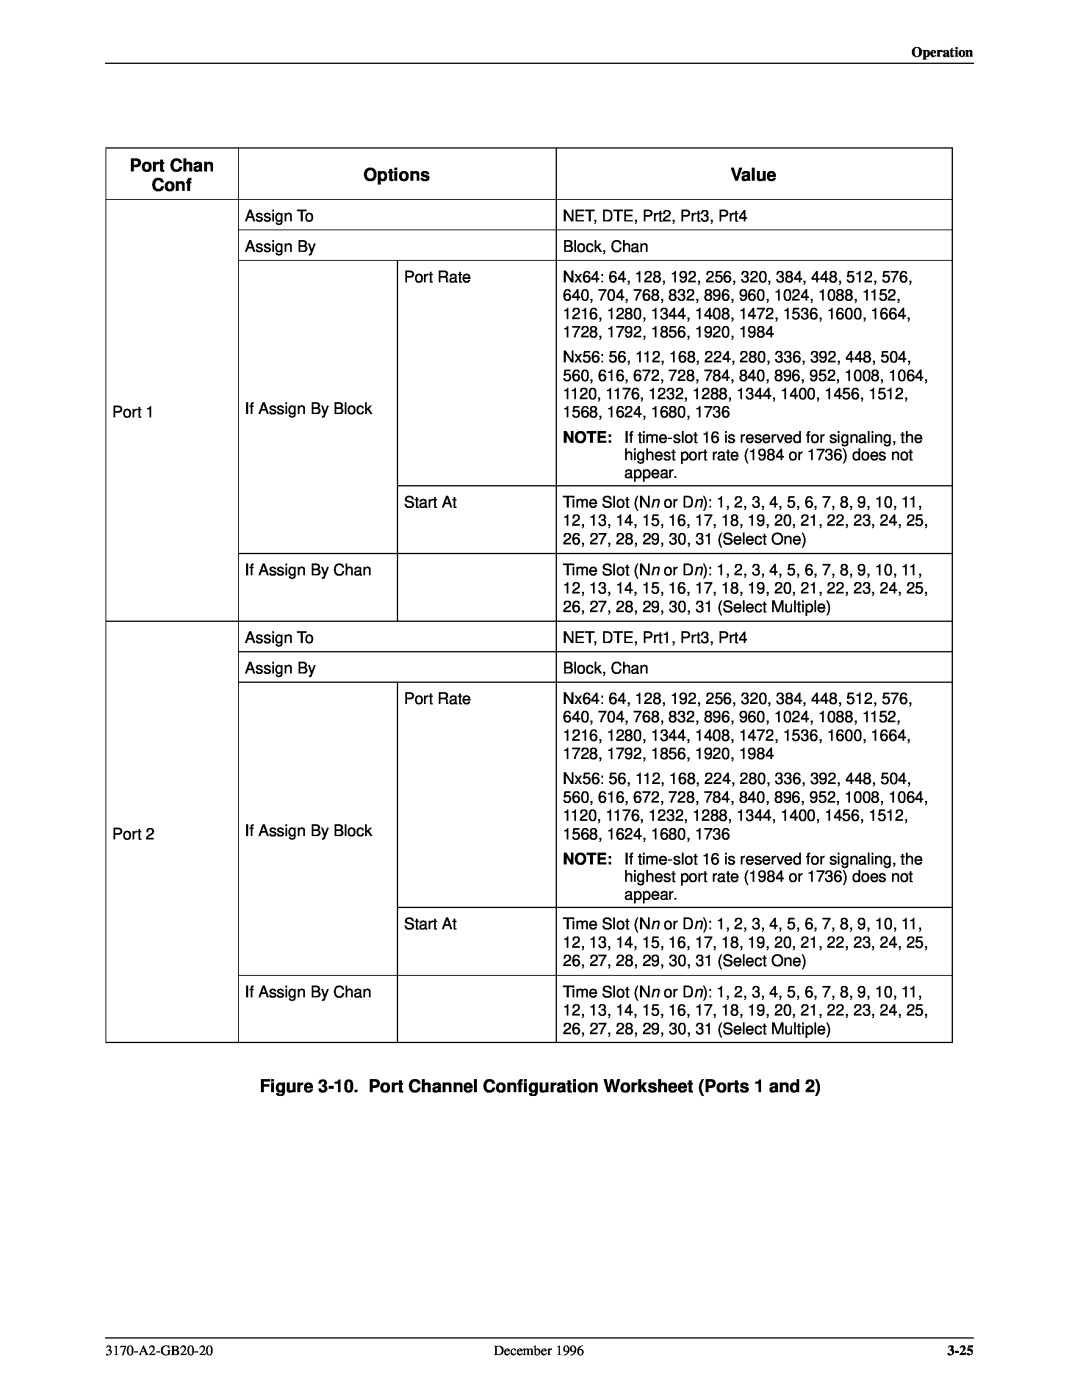 Paradyne 317x E1 manual Options, Value, 10. Port Channel Configuration Worksheet Ports 1 and 